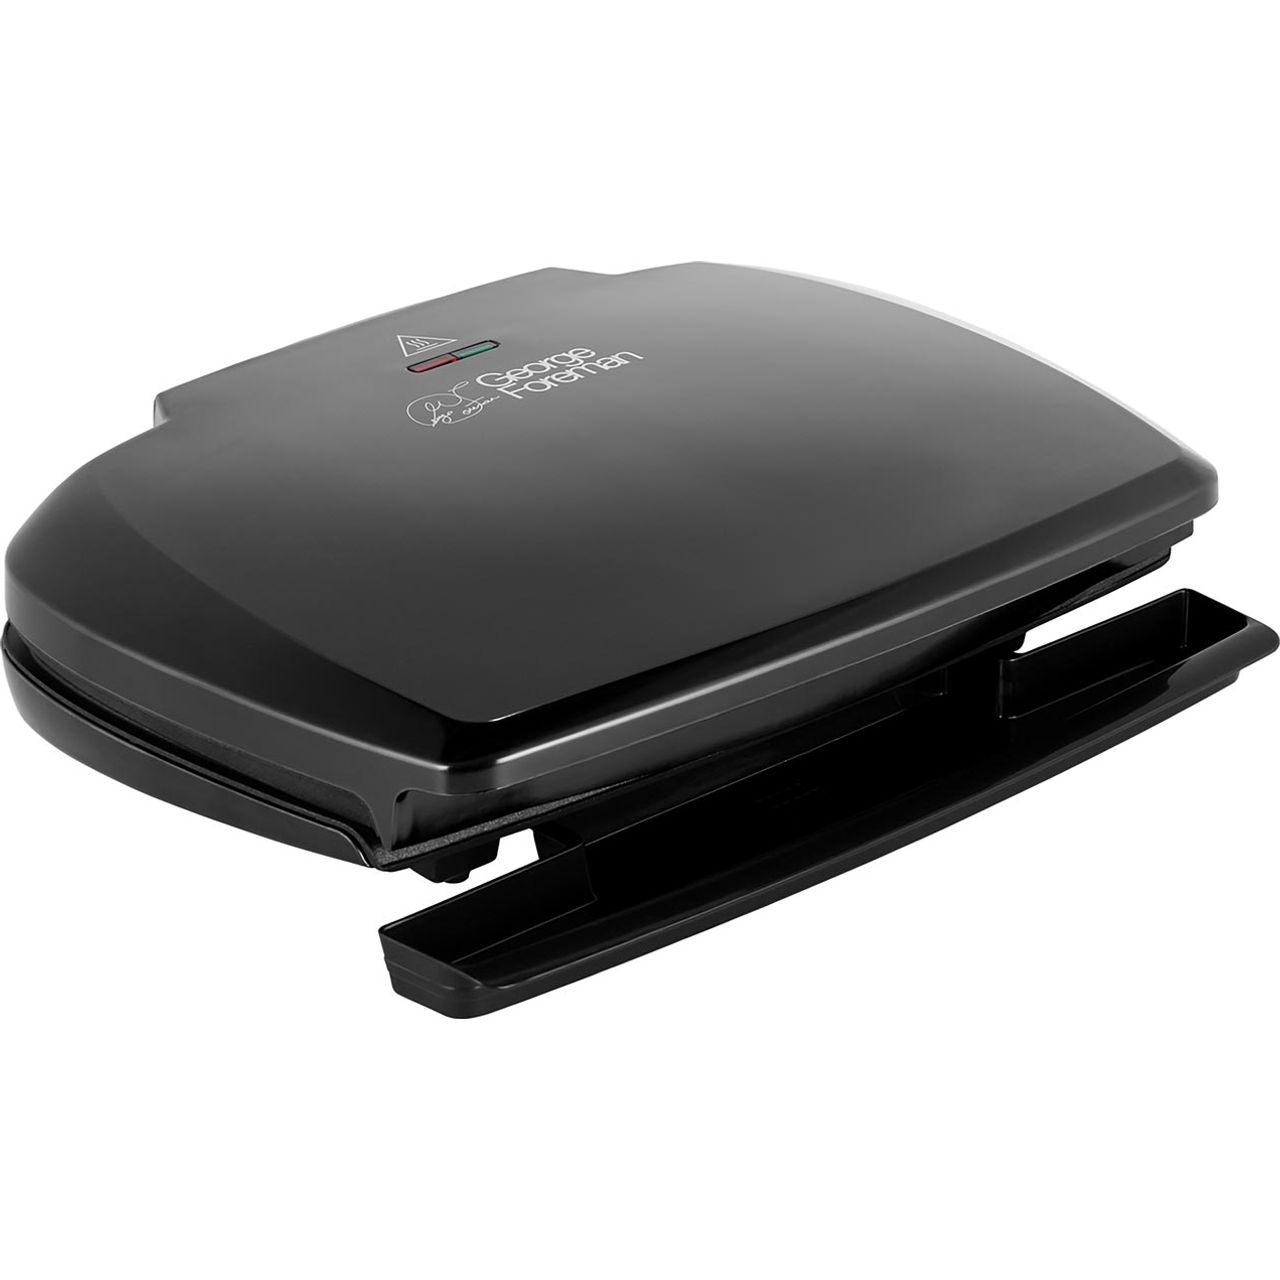 George Foreman Entertaining 10 Portion 23440 Health Grill Review